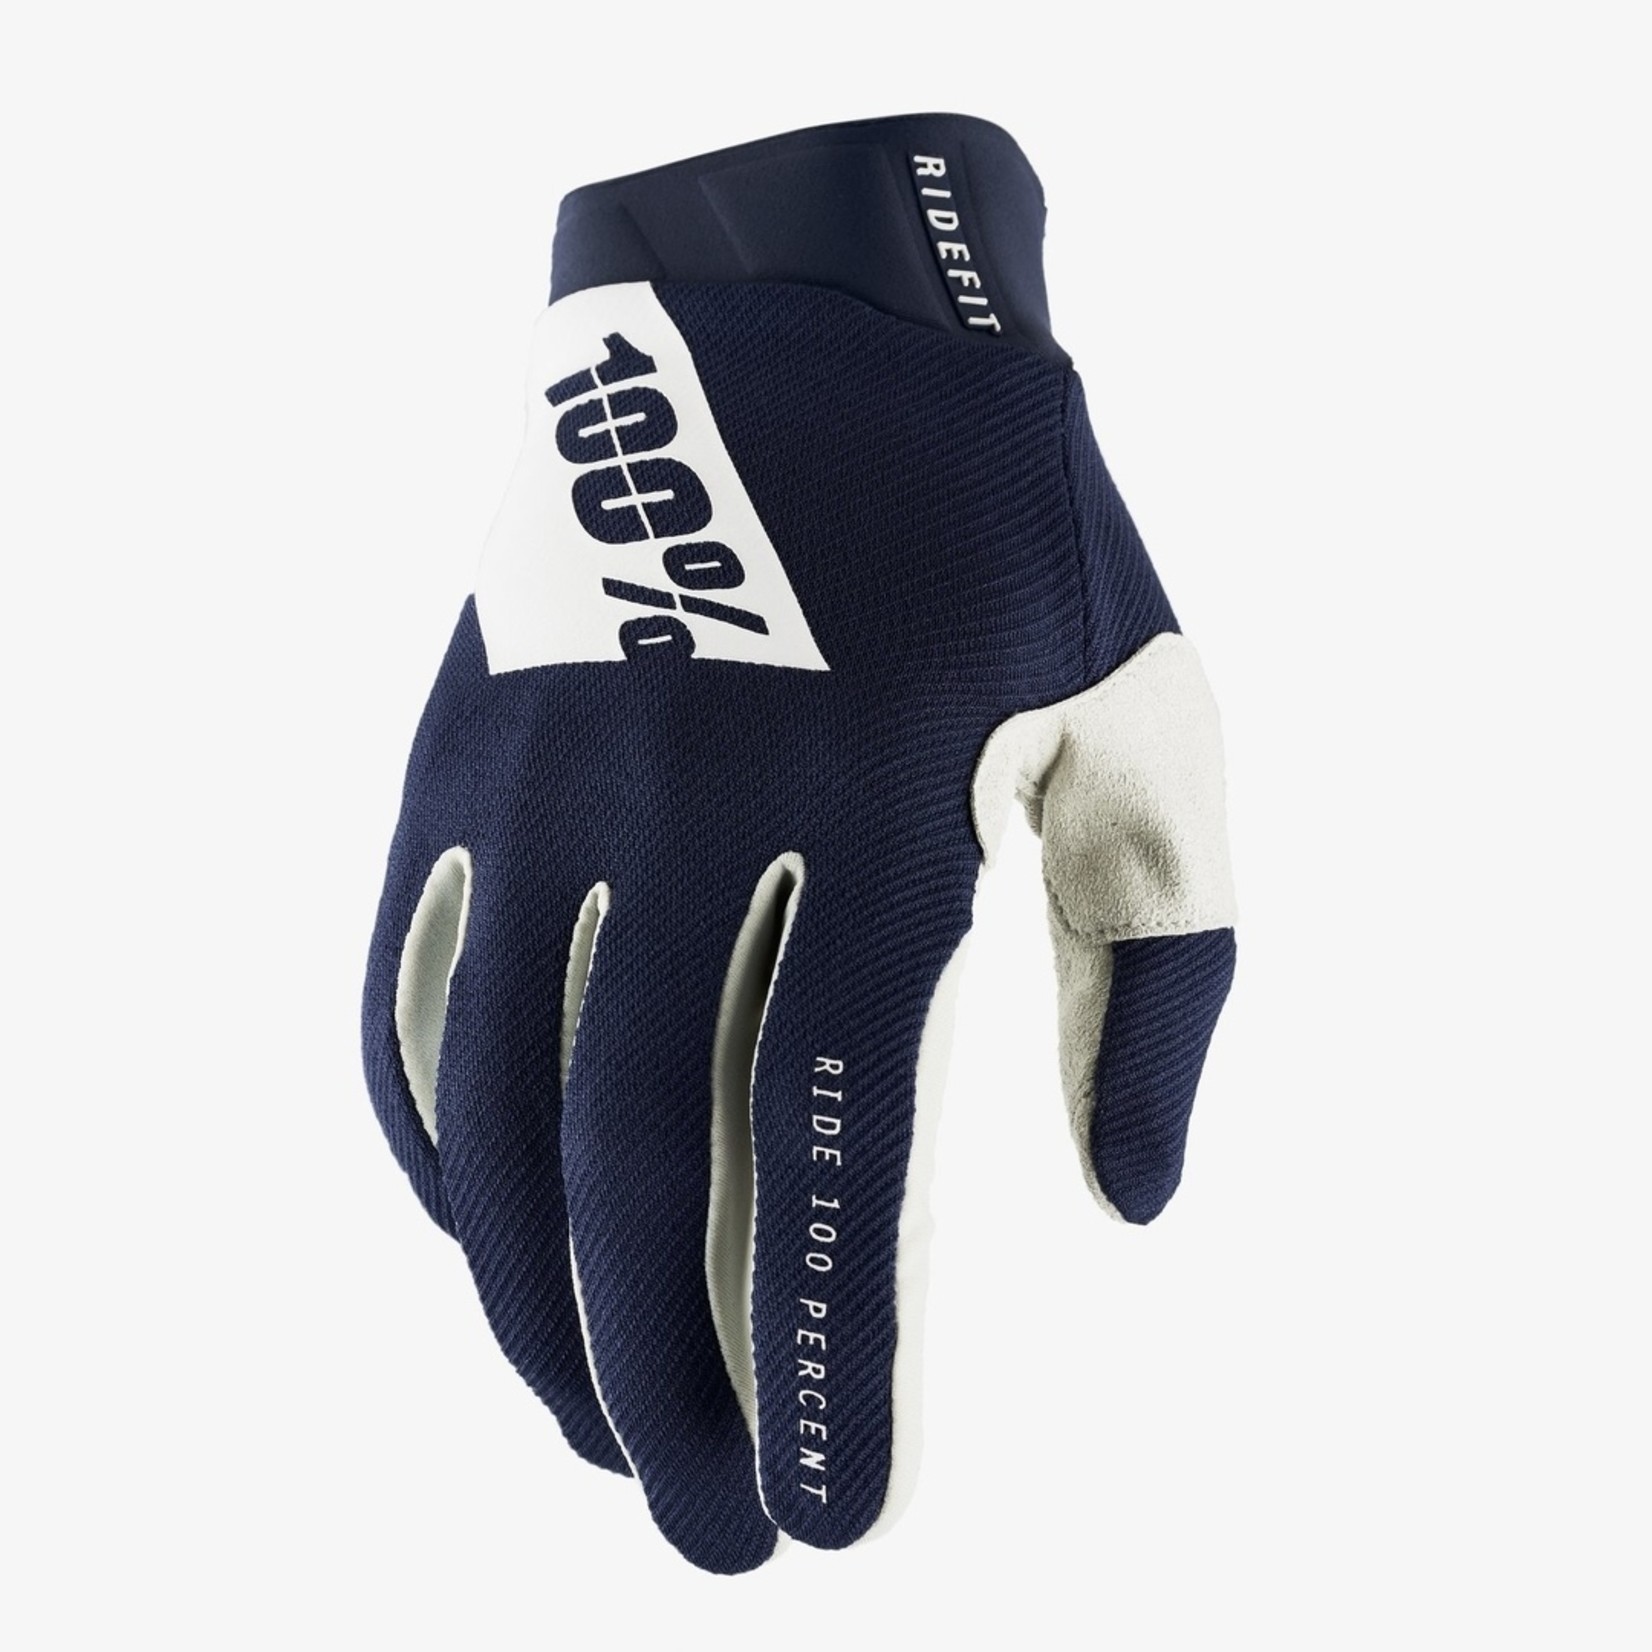 FE sports 100% Ridefit Adjustable TPR Cycling Gloves - Navy/White